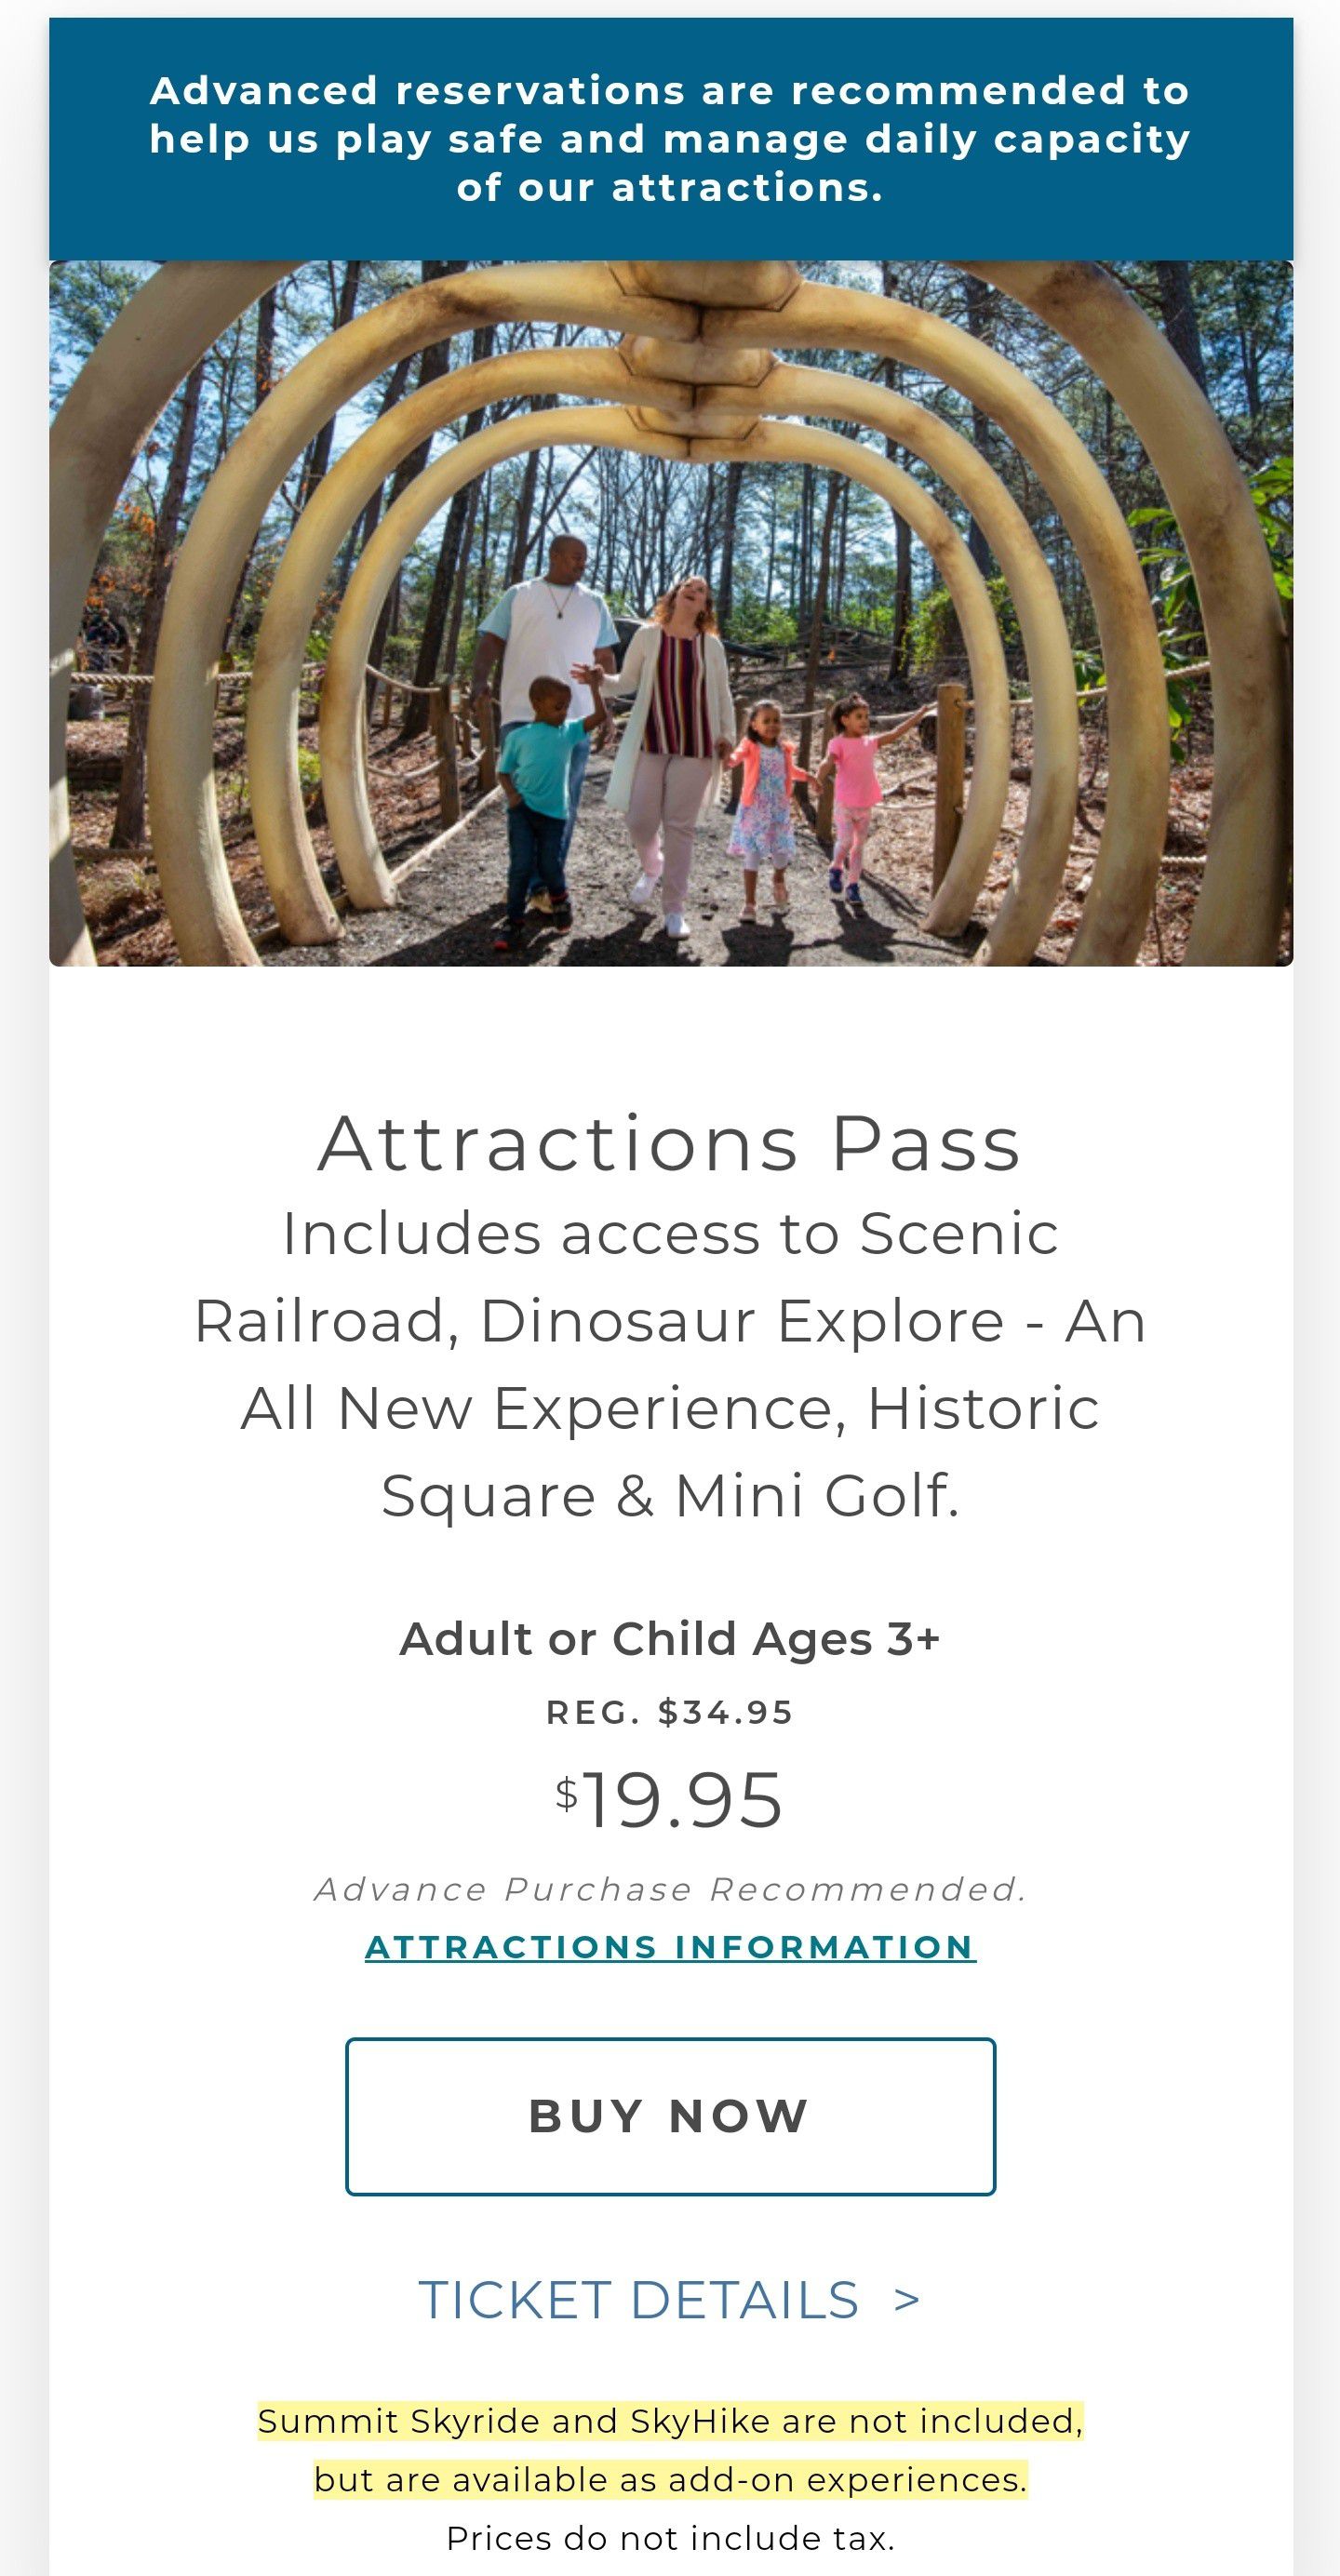 Stone mountain park all-attraction pass